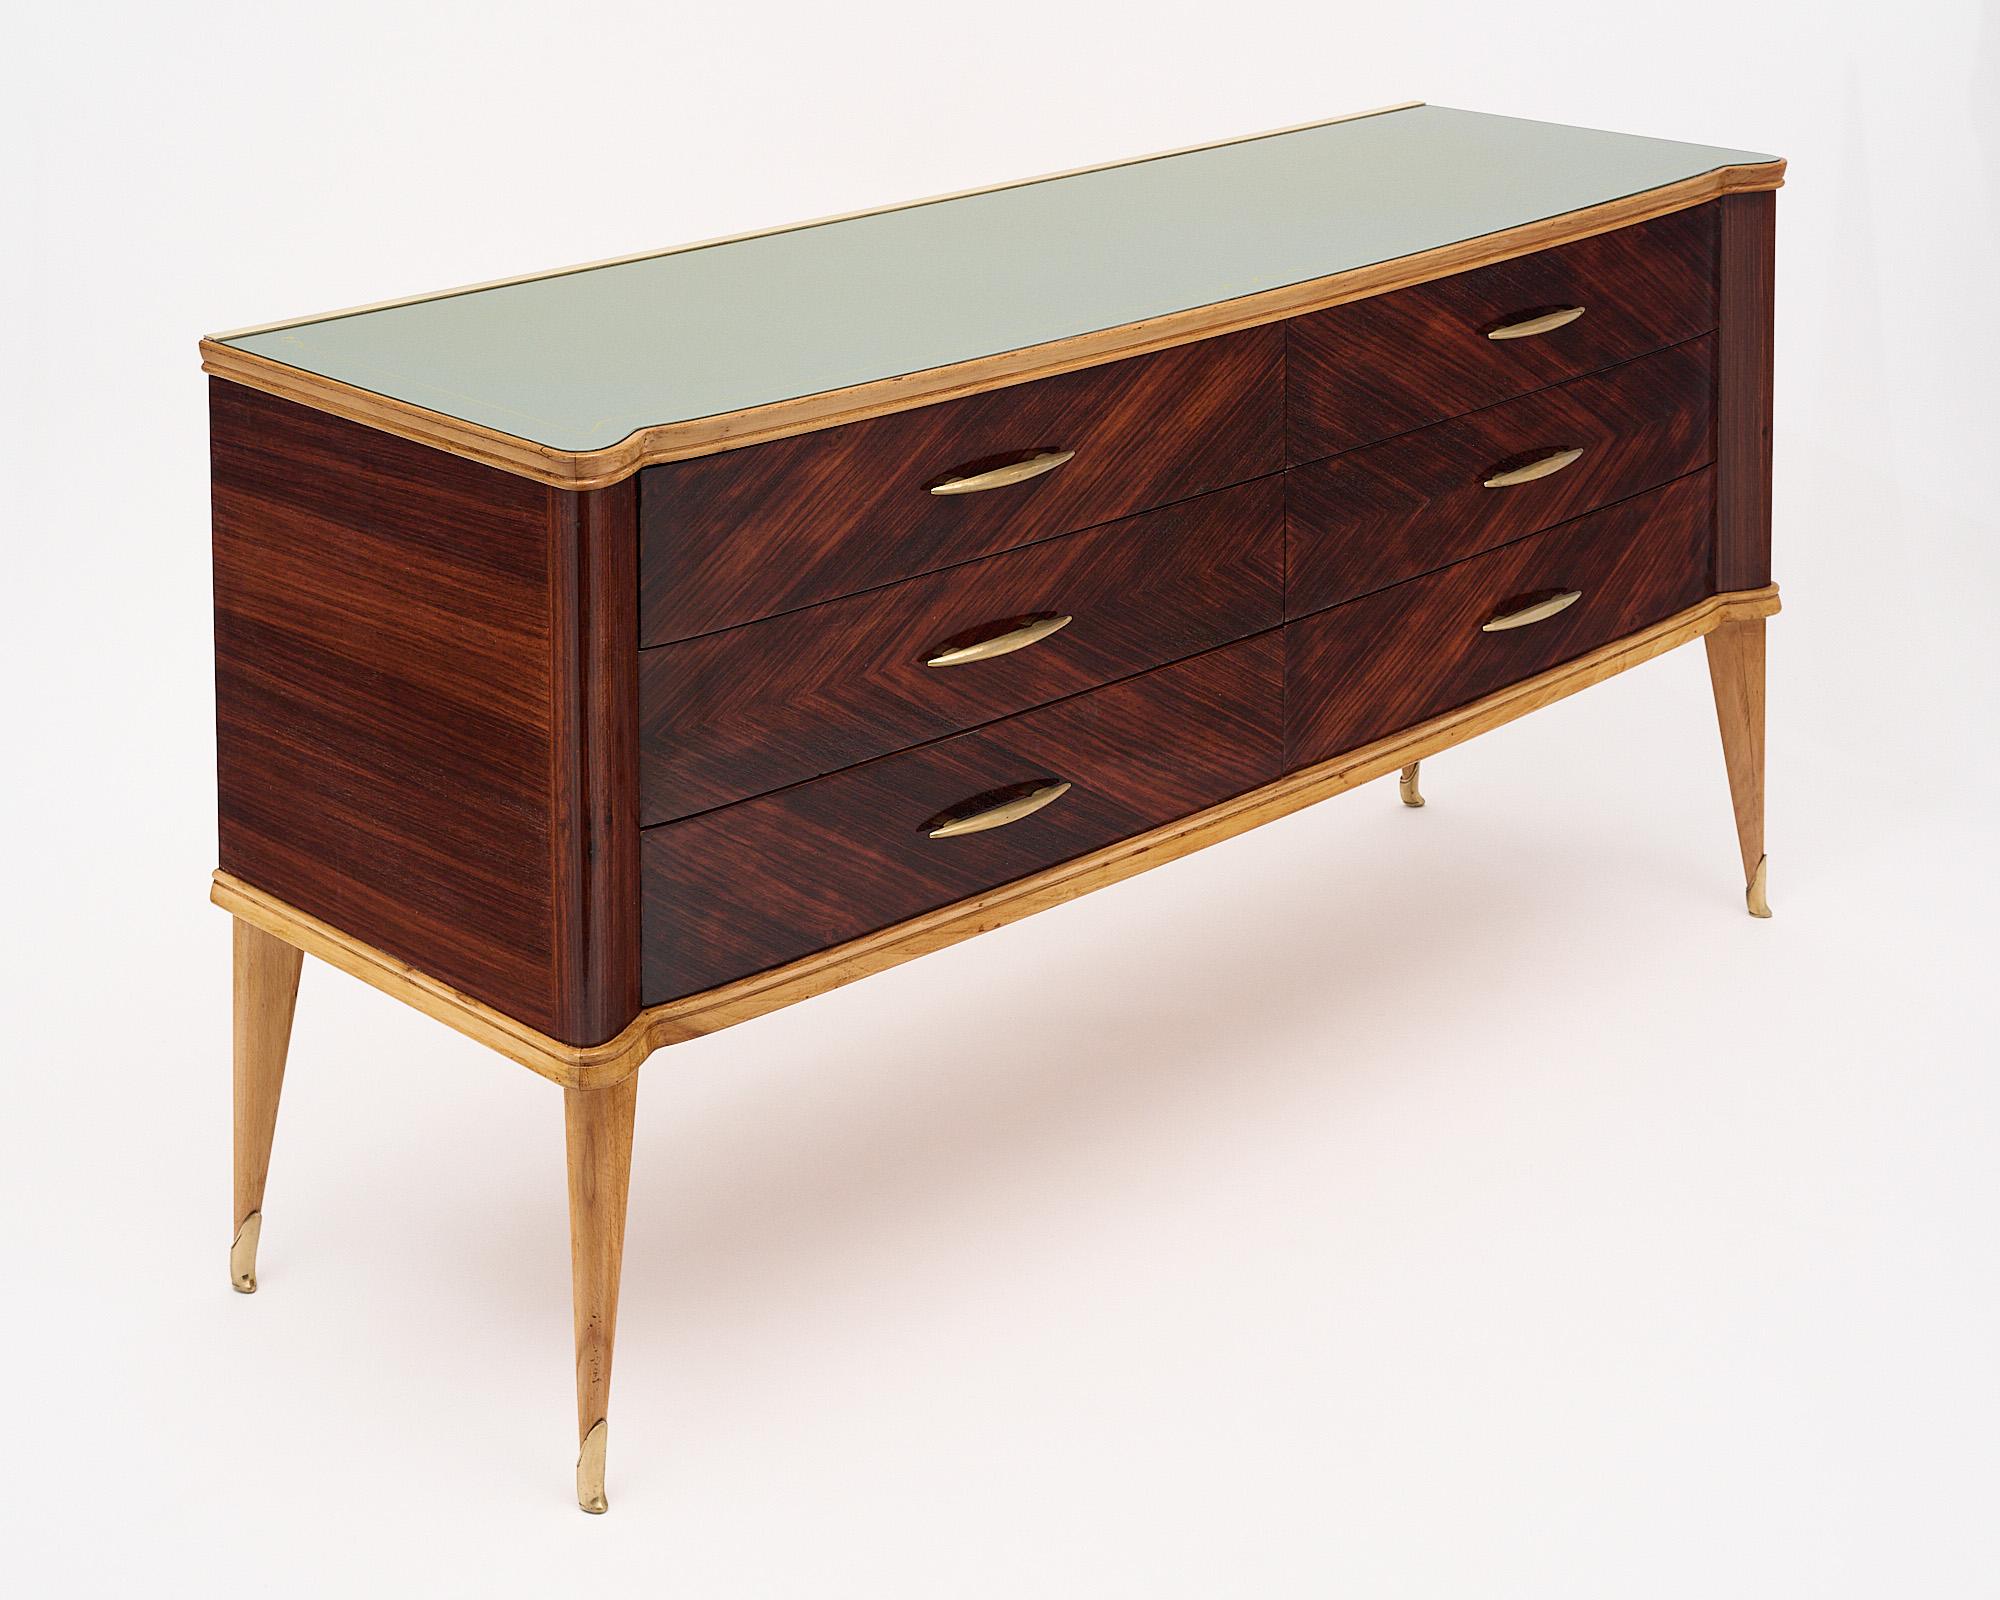 Chest of drawers from Italy with a beautiful rosewood veneer and glass top. There are six dovetailed drawers with brass hardware on each. A lighter wood frames the body of the chest and holds the frosted glass top in place. The four tapered legs are